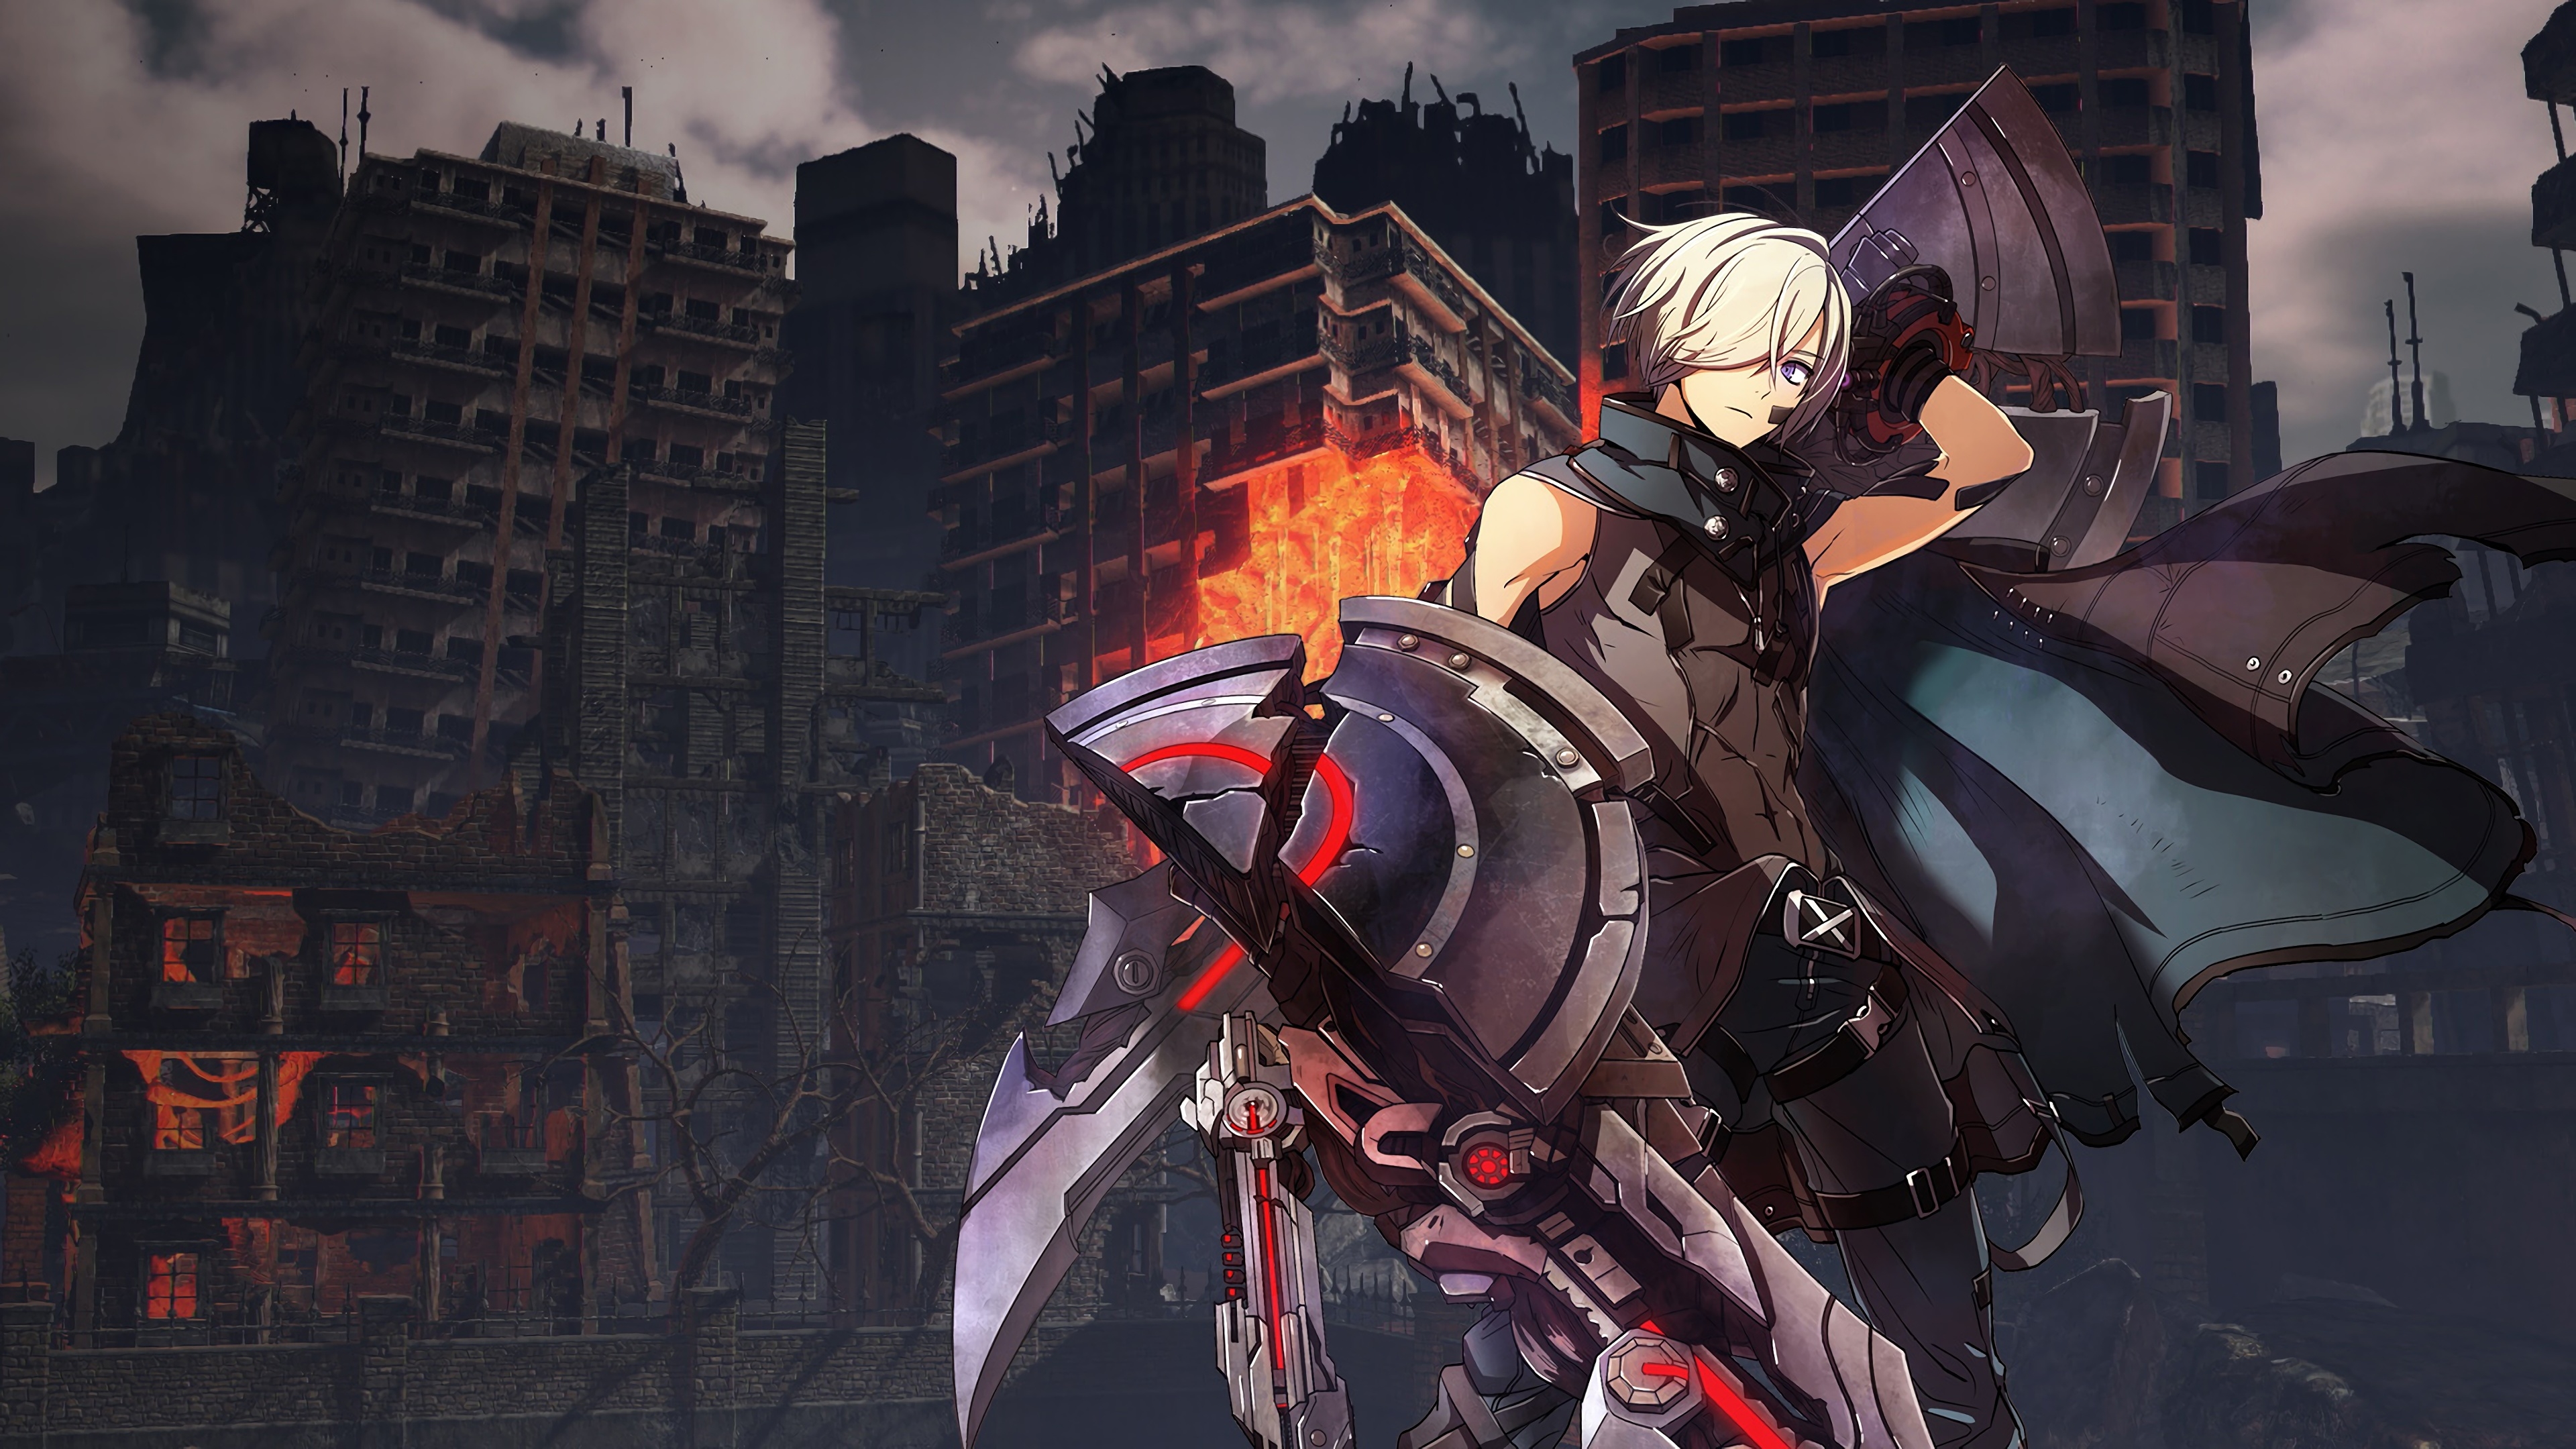 God Eater 3 4k Wallpaper Hd Games 4k Wallpapers Images Photos And Background Wallpapers Den